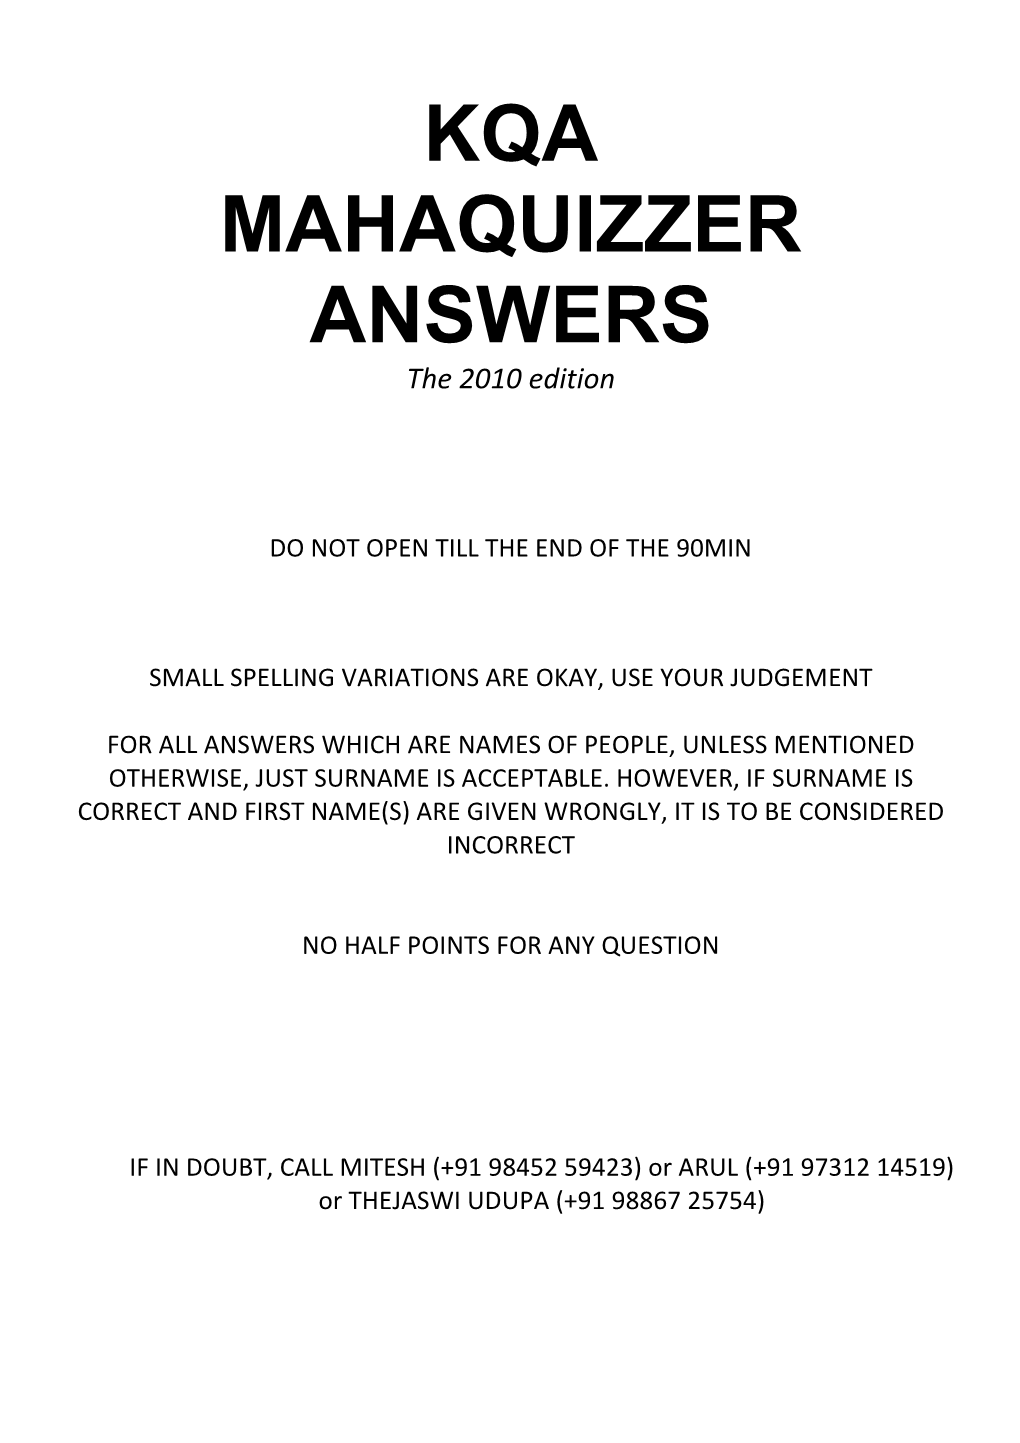 KQA MAHAQUIZZER ANSWERS ����2010��Dition� 